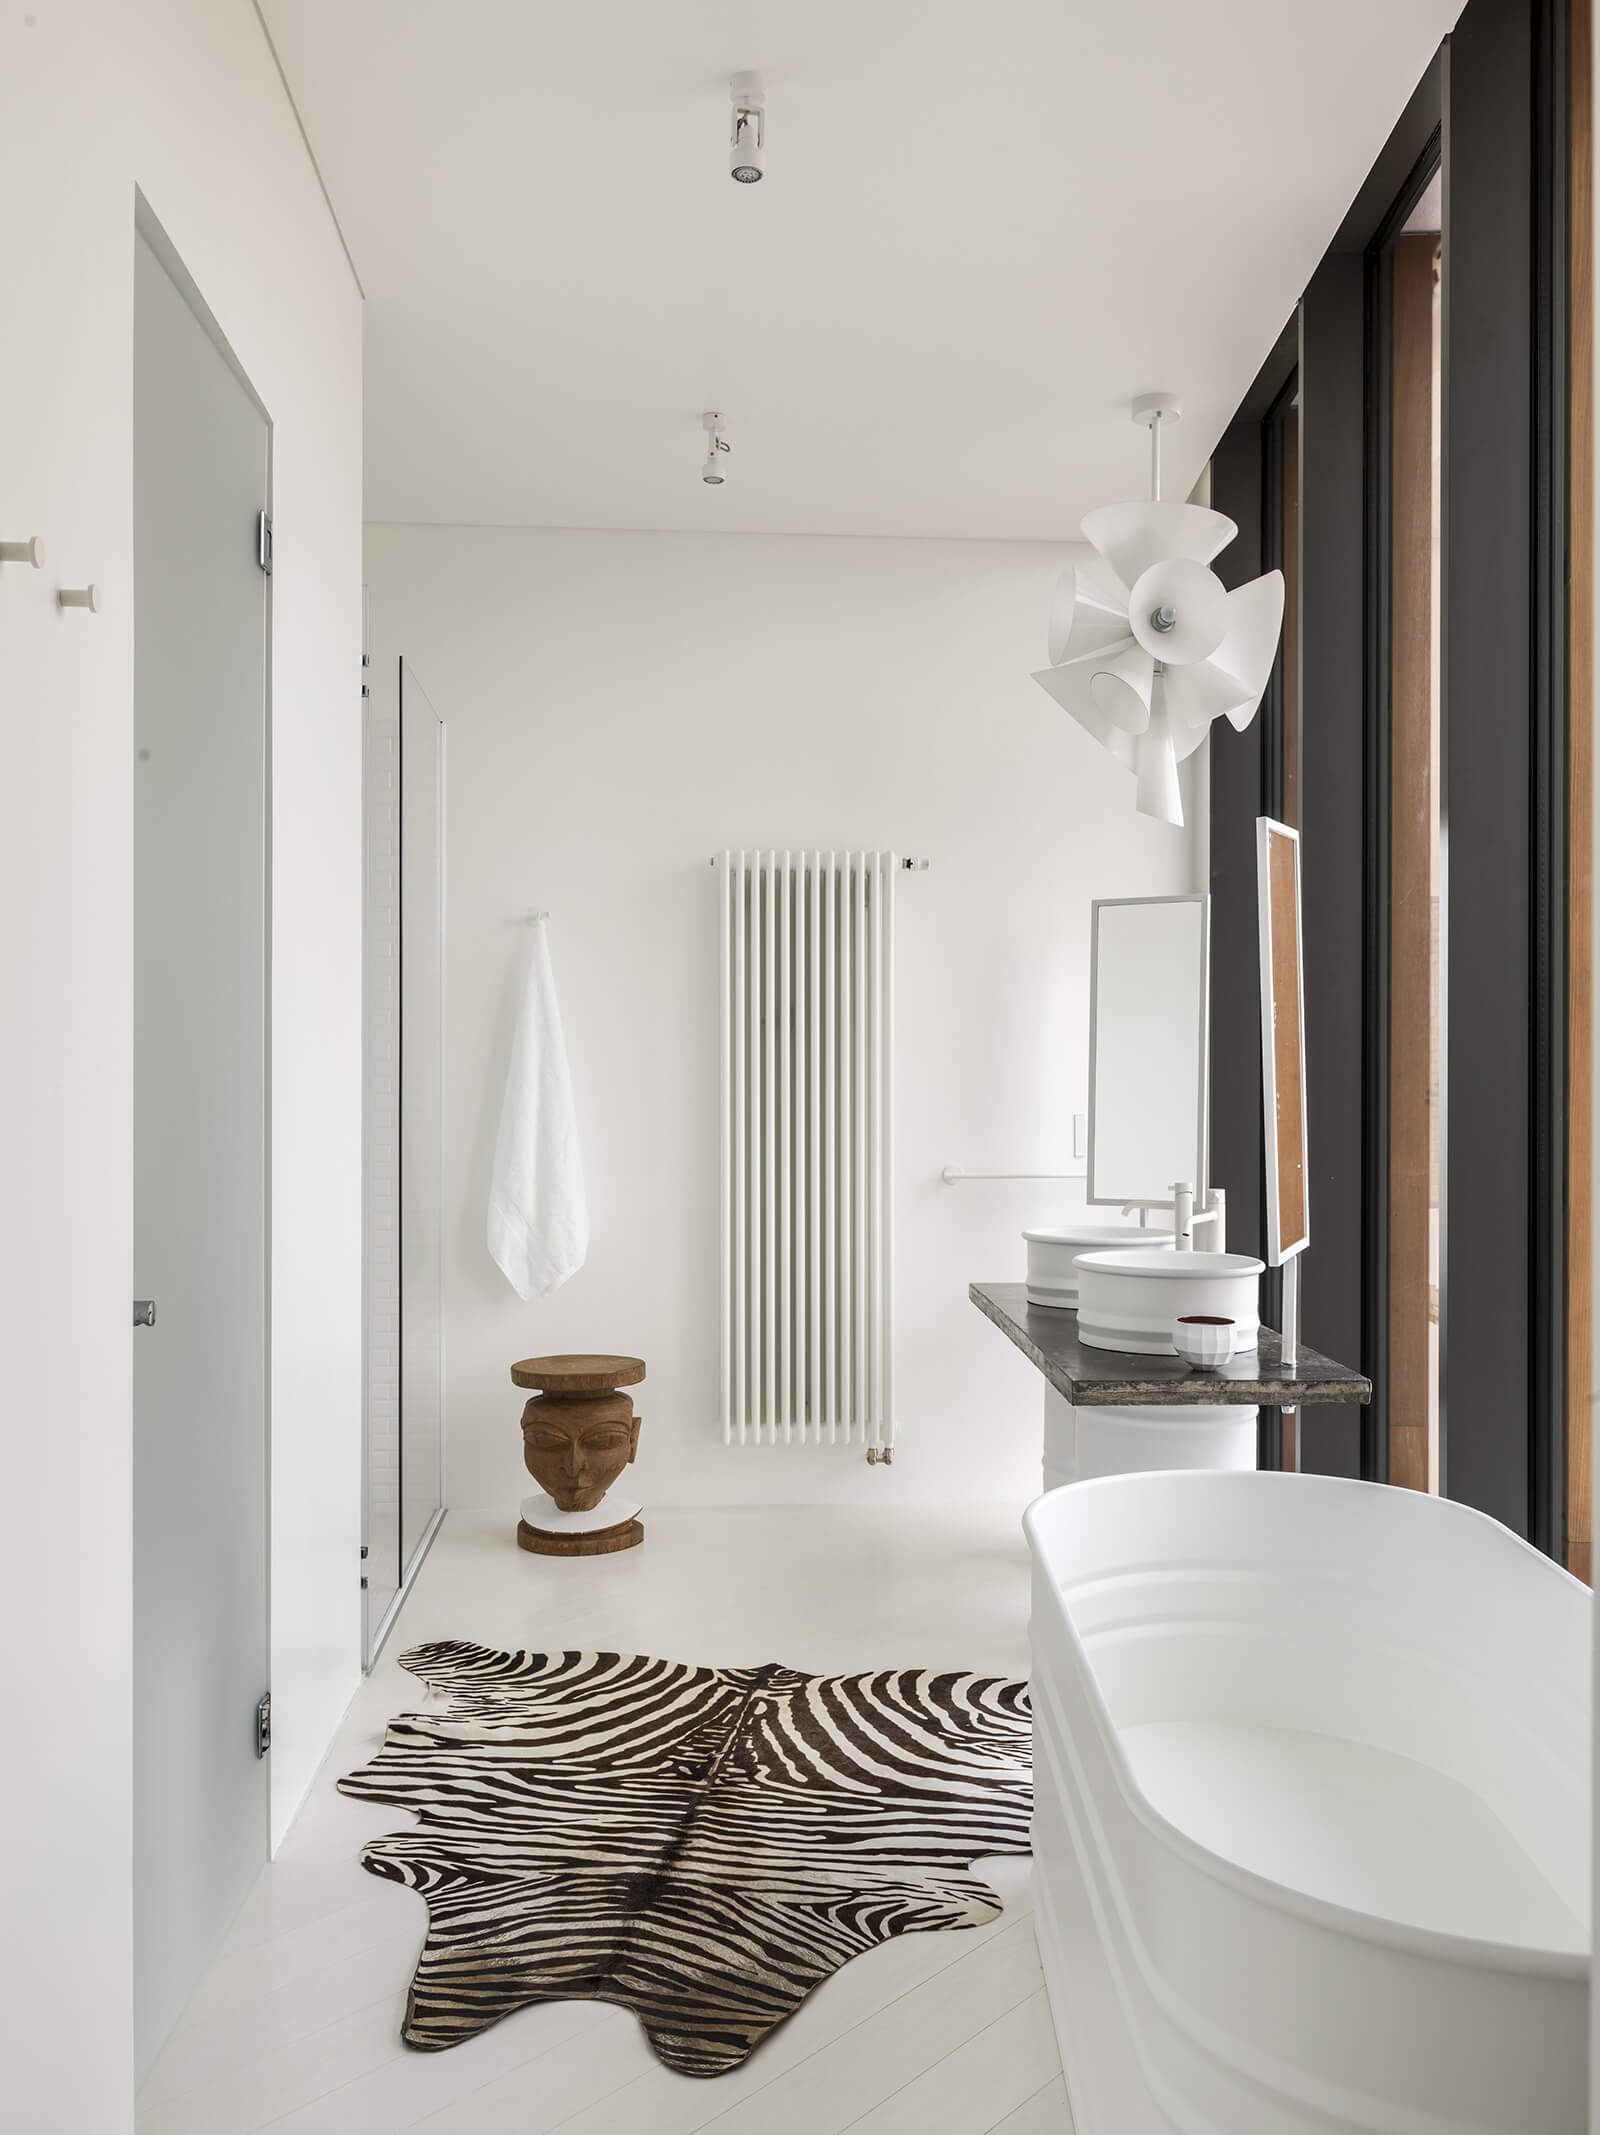 The bathrooms exhibit a similar design aesthetic as the rest of the home | Moscow Home| Anna Erman| STIRworld